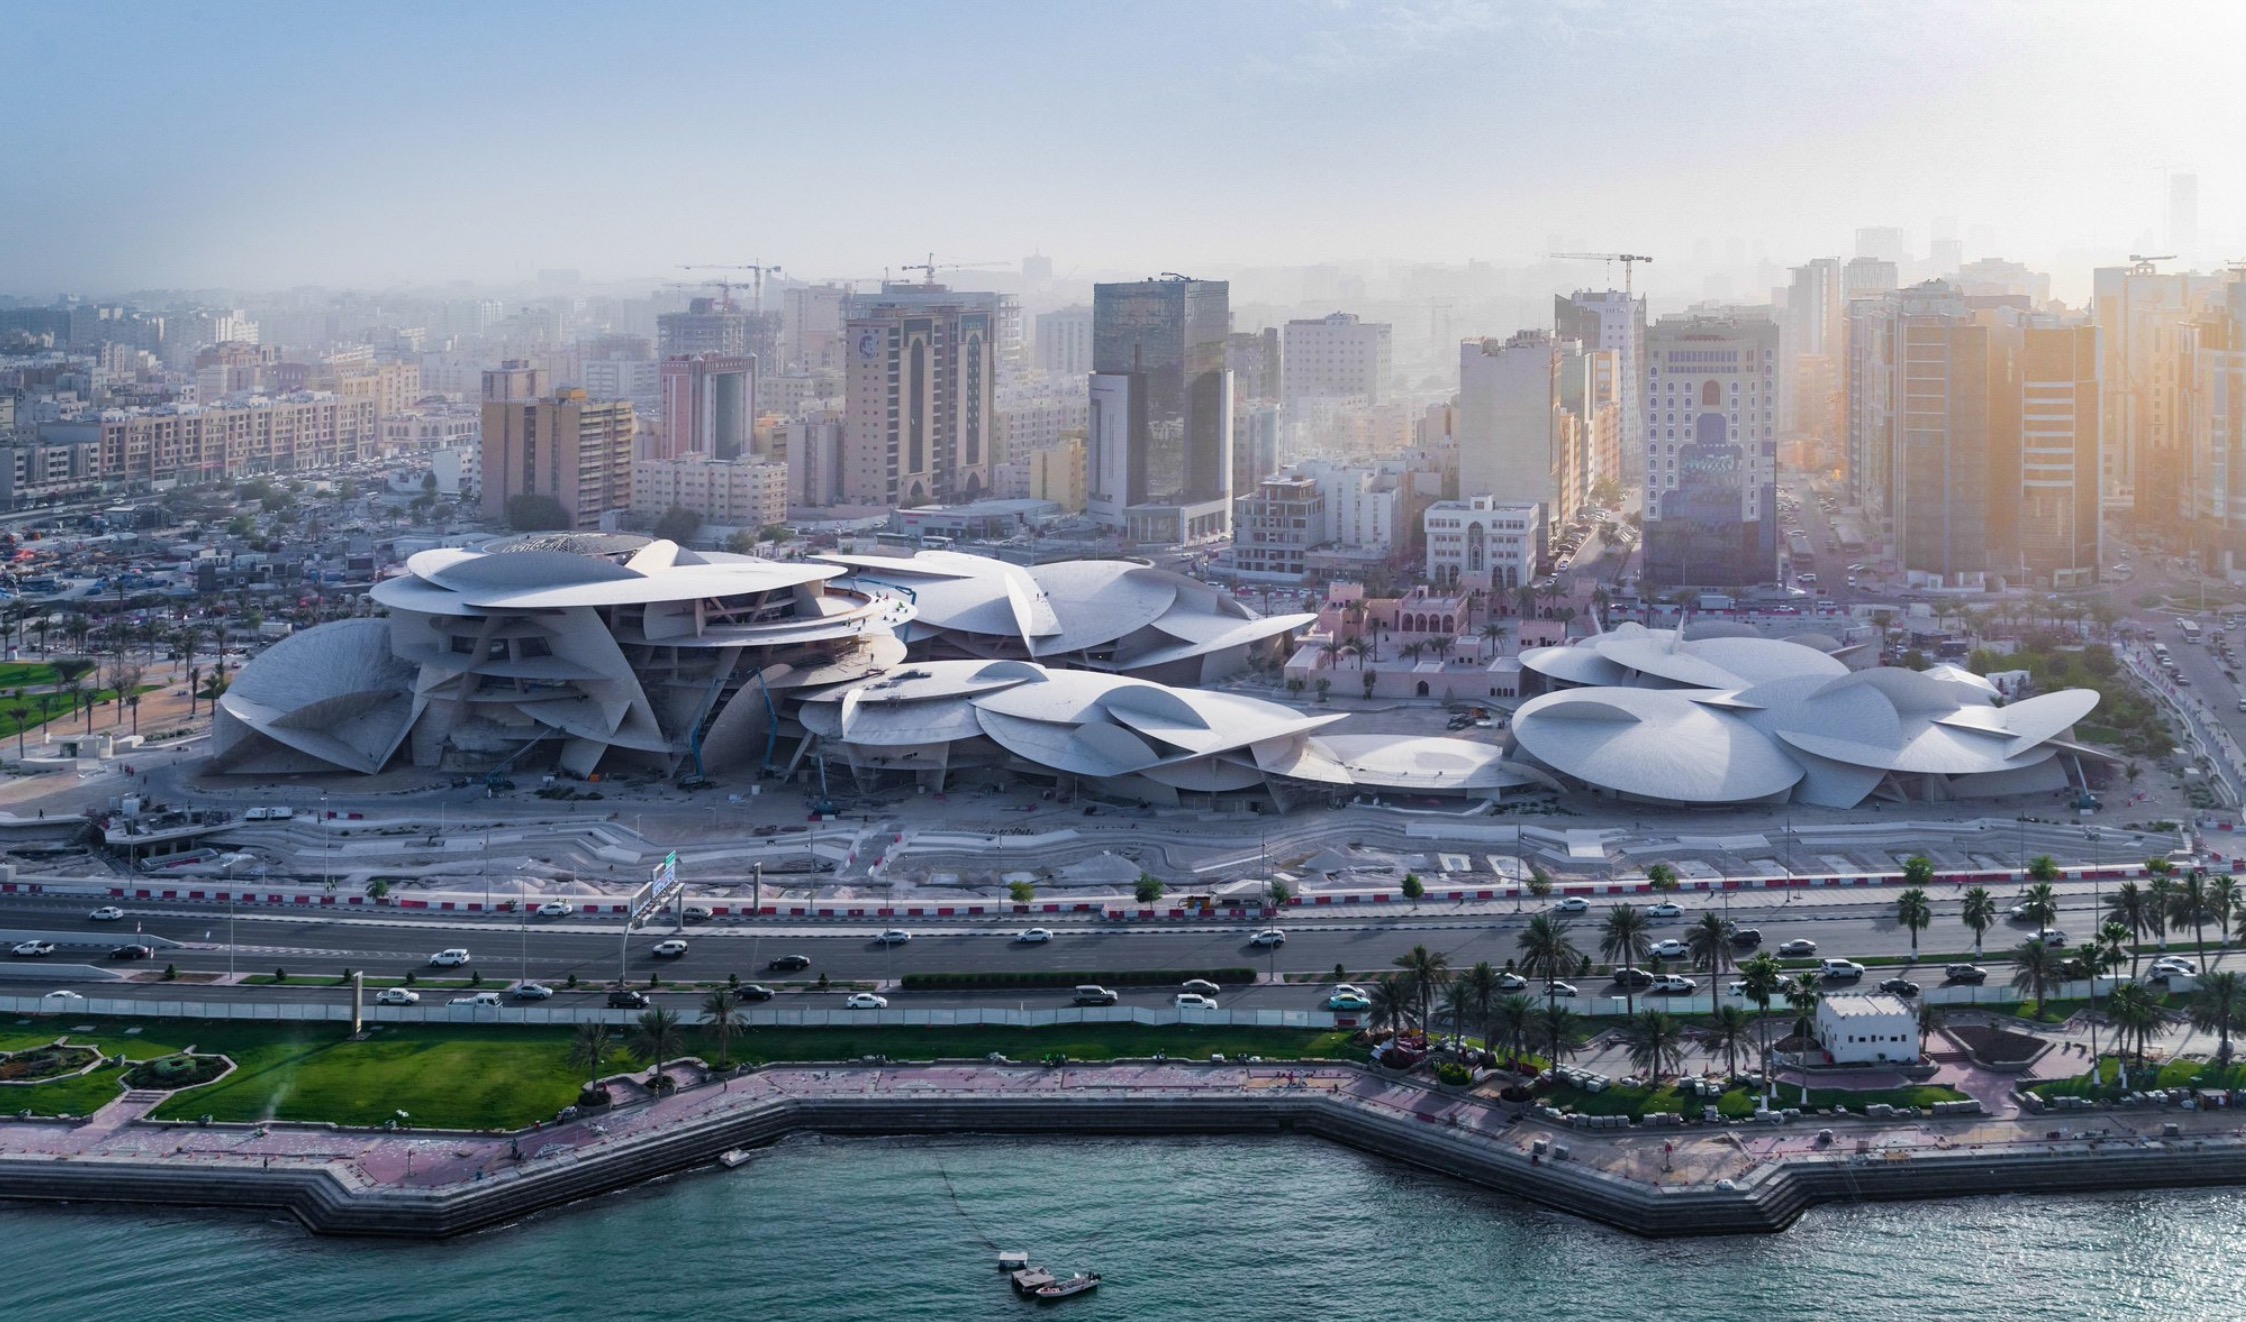 National Museum of Qatar announce the opening date 28.03.2019